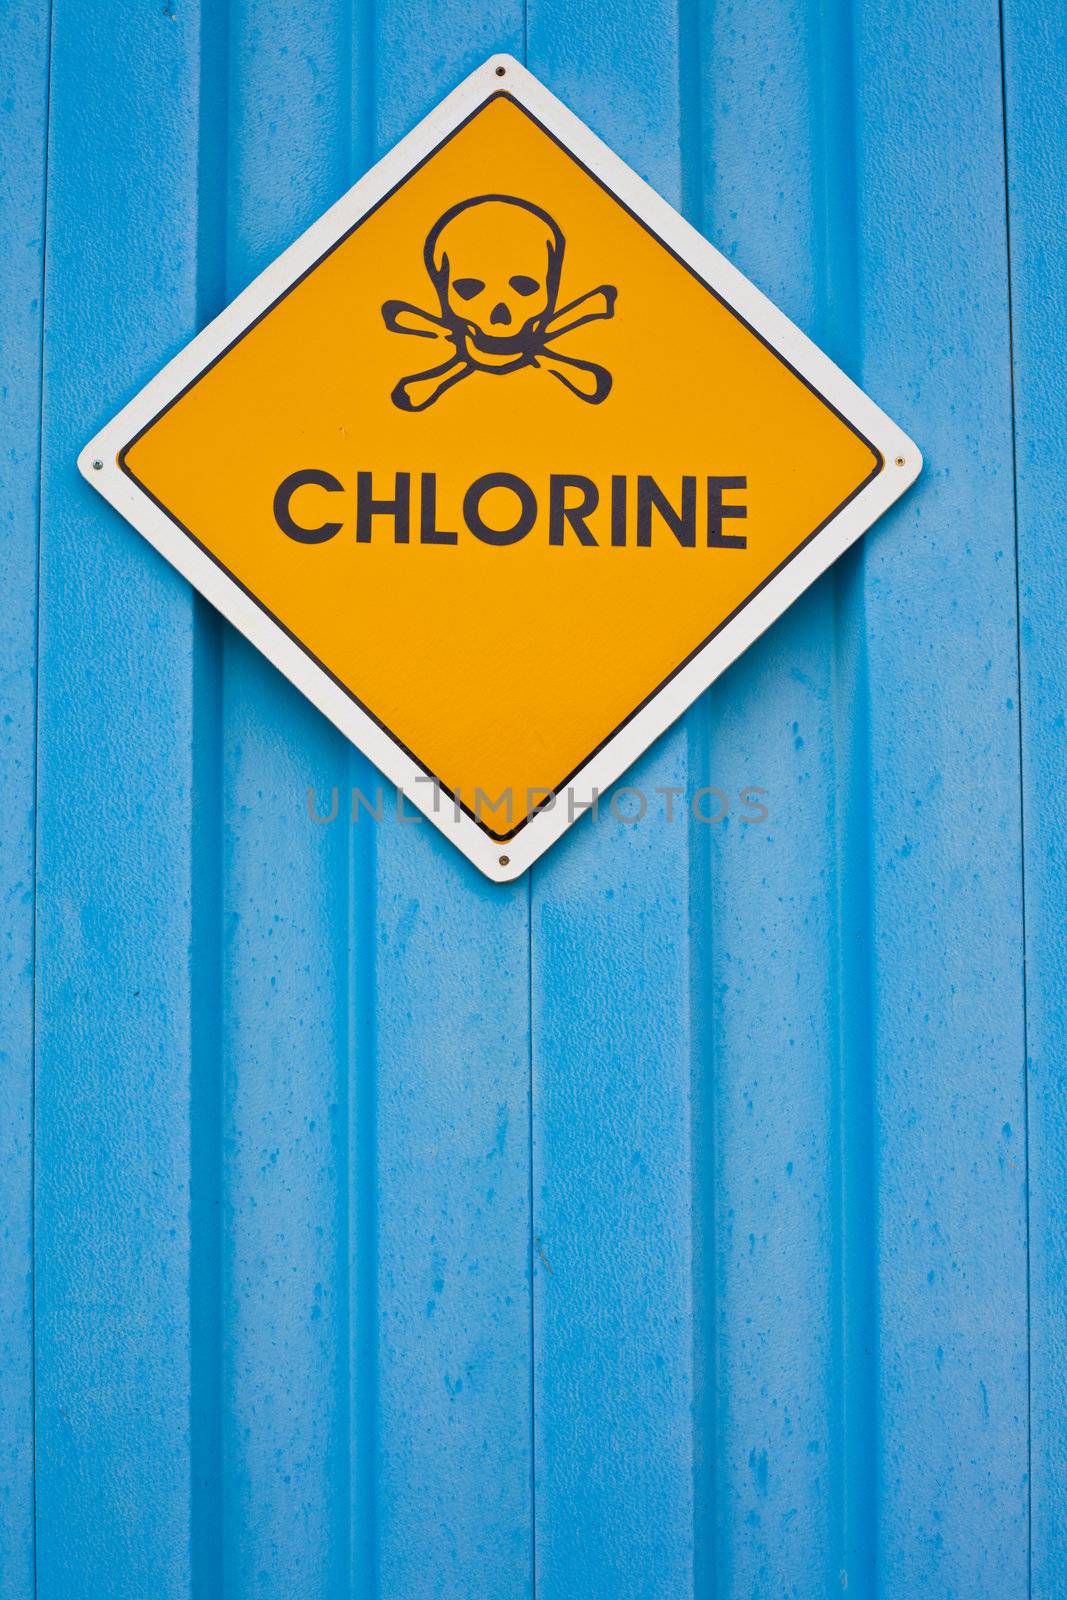 Chlorine warning sign with skull and crossbones on blue background.